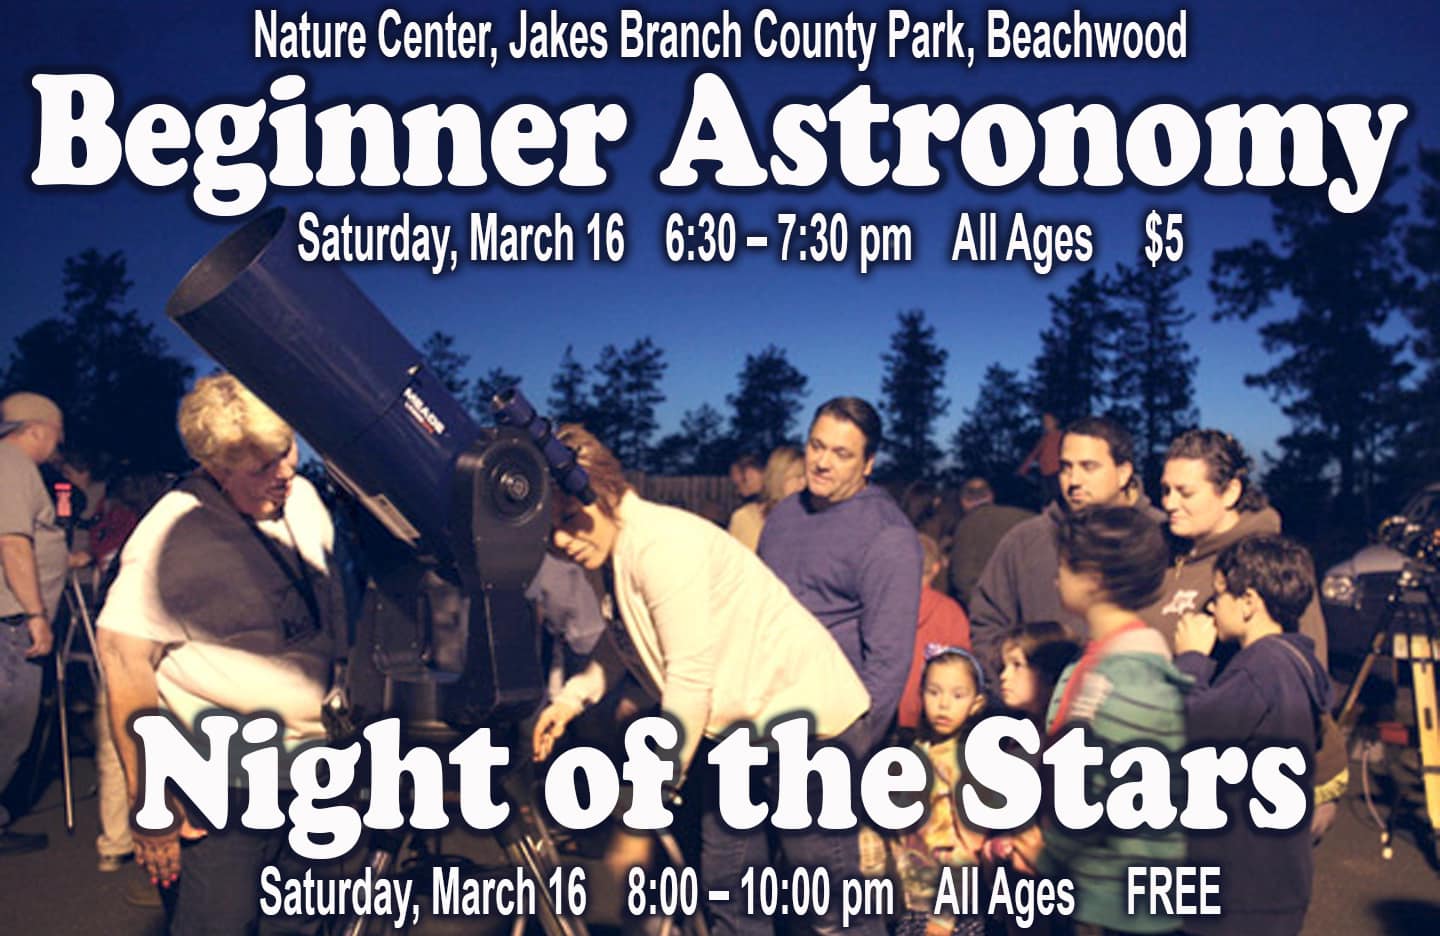 Join Jim Webster from the Astronomical Society of the Toms River Area